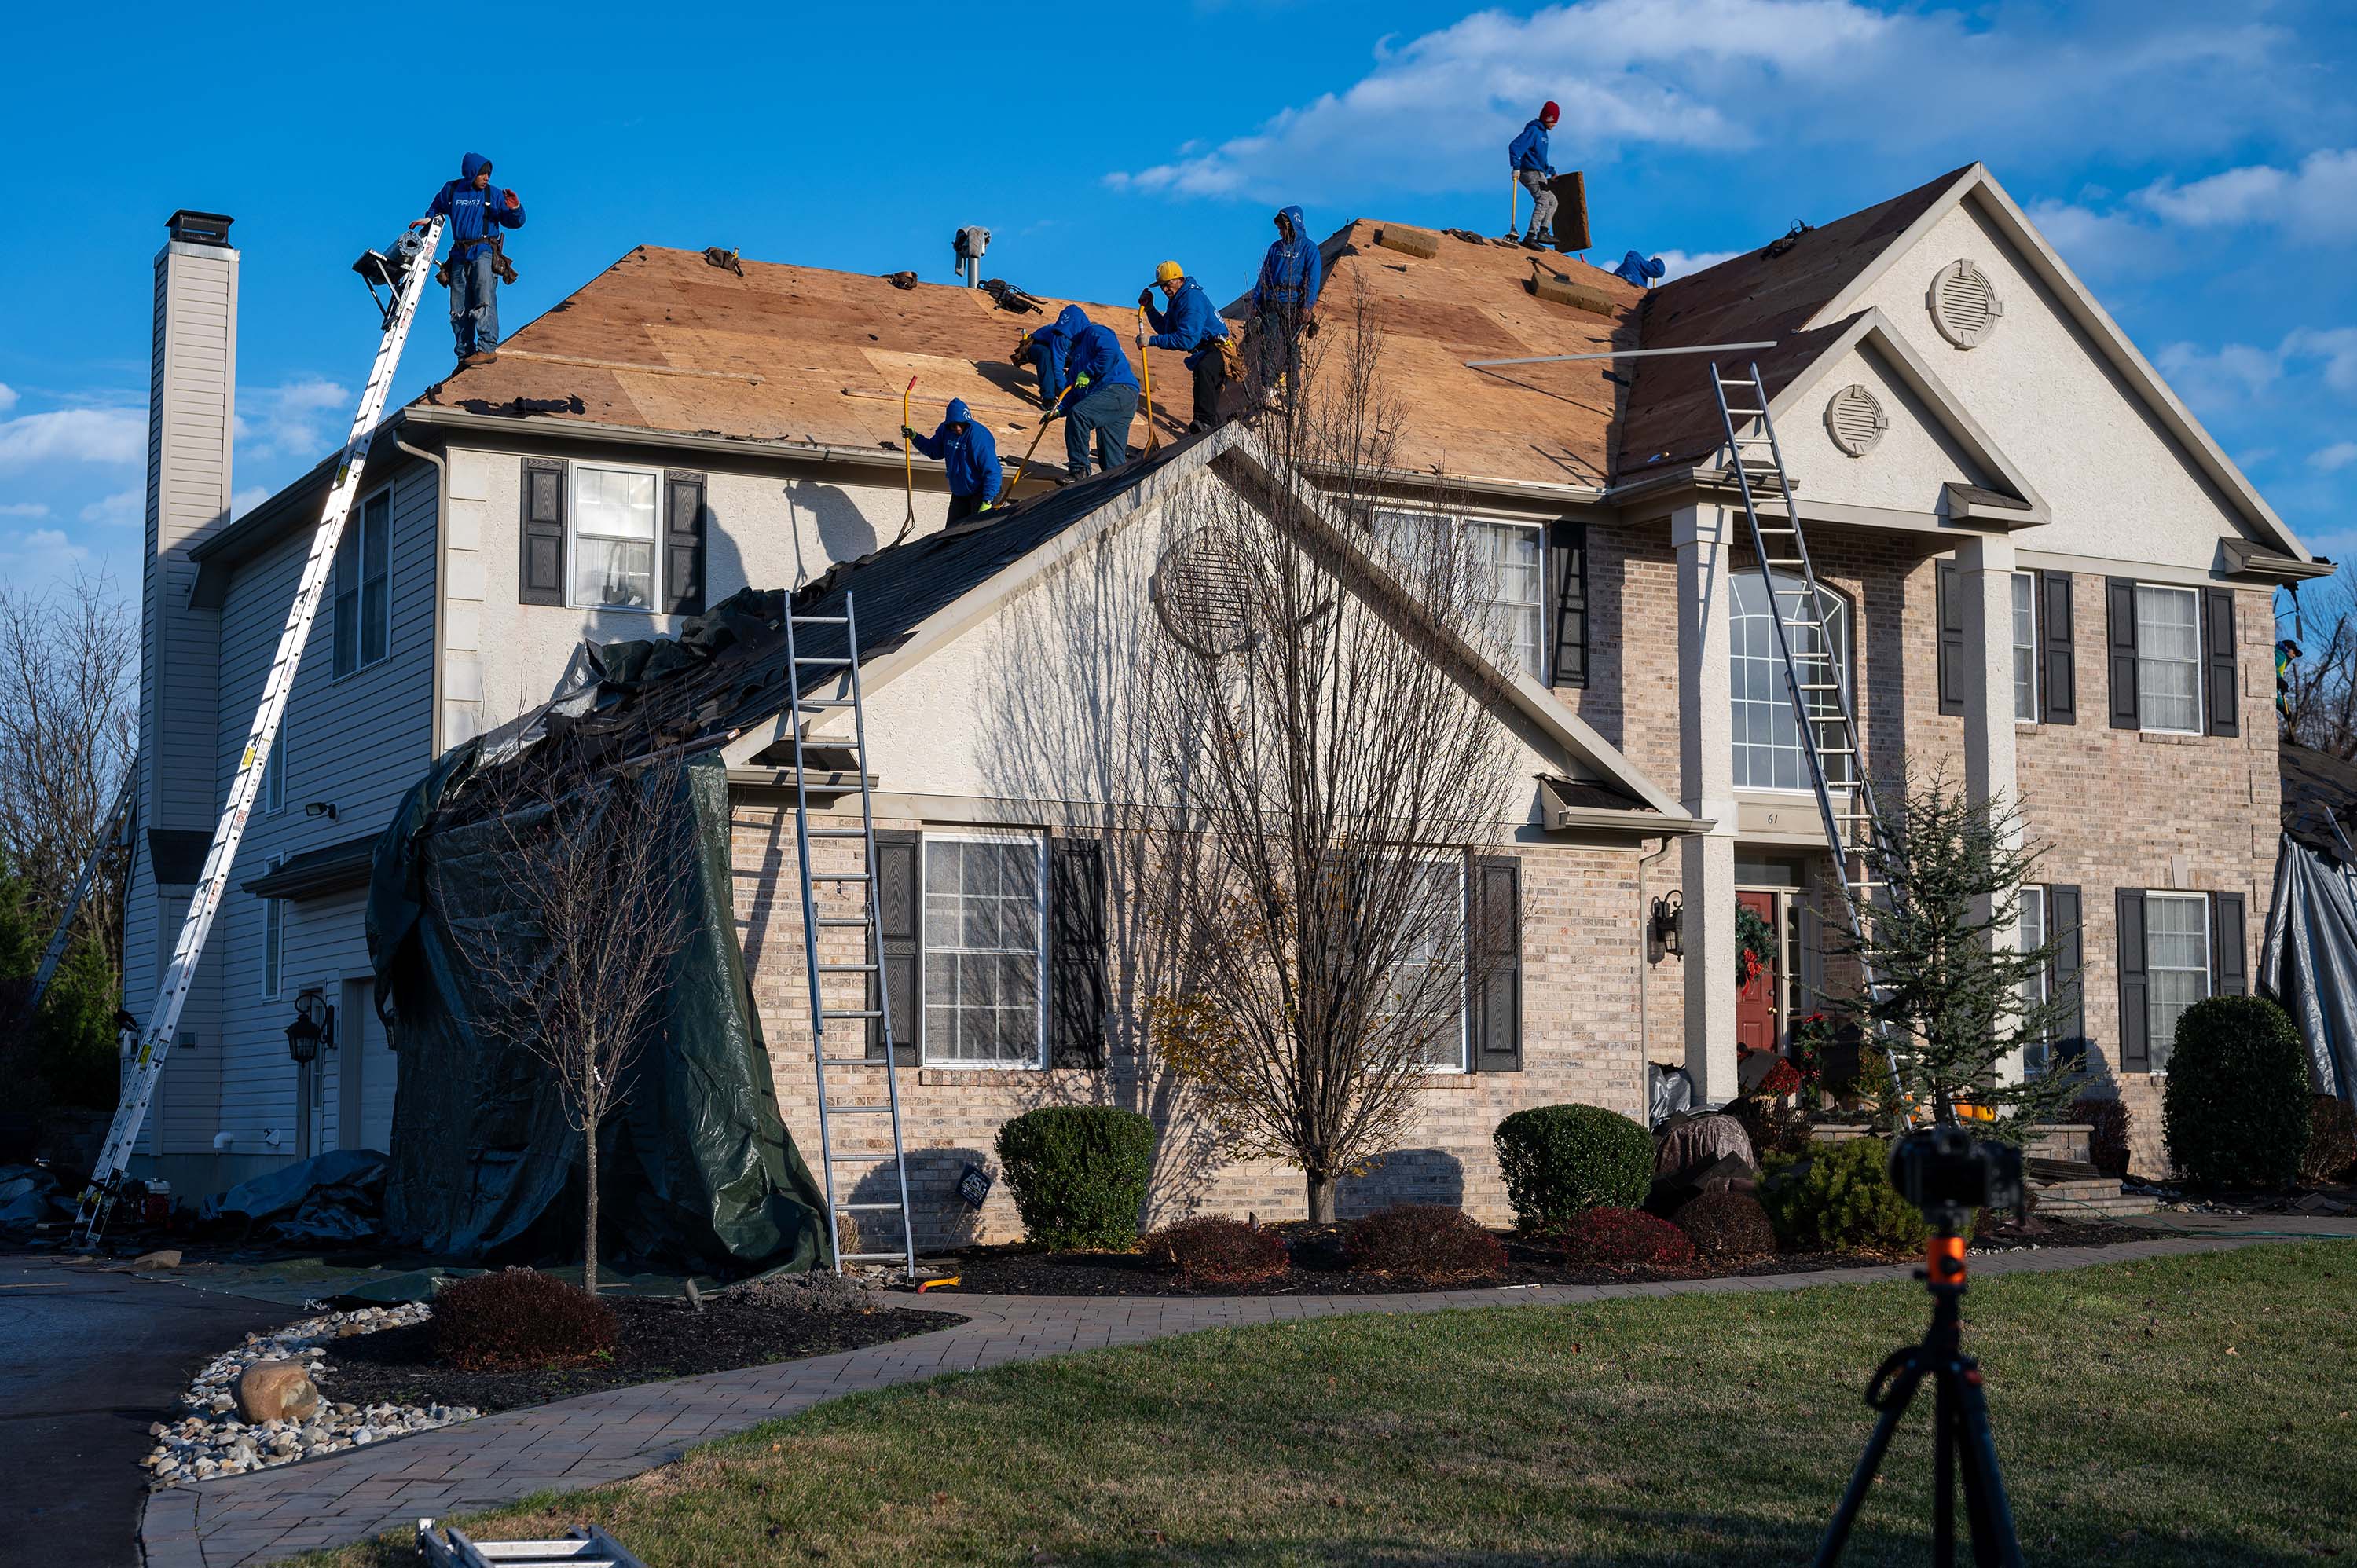 Roofing repair company - residential roofing contractors in Marlton (large image)